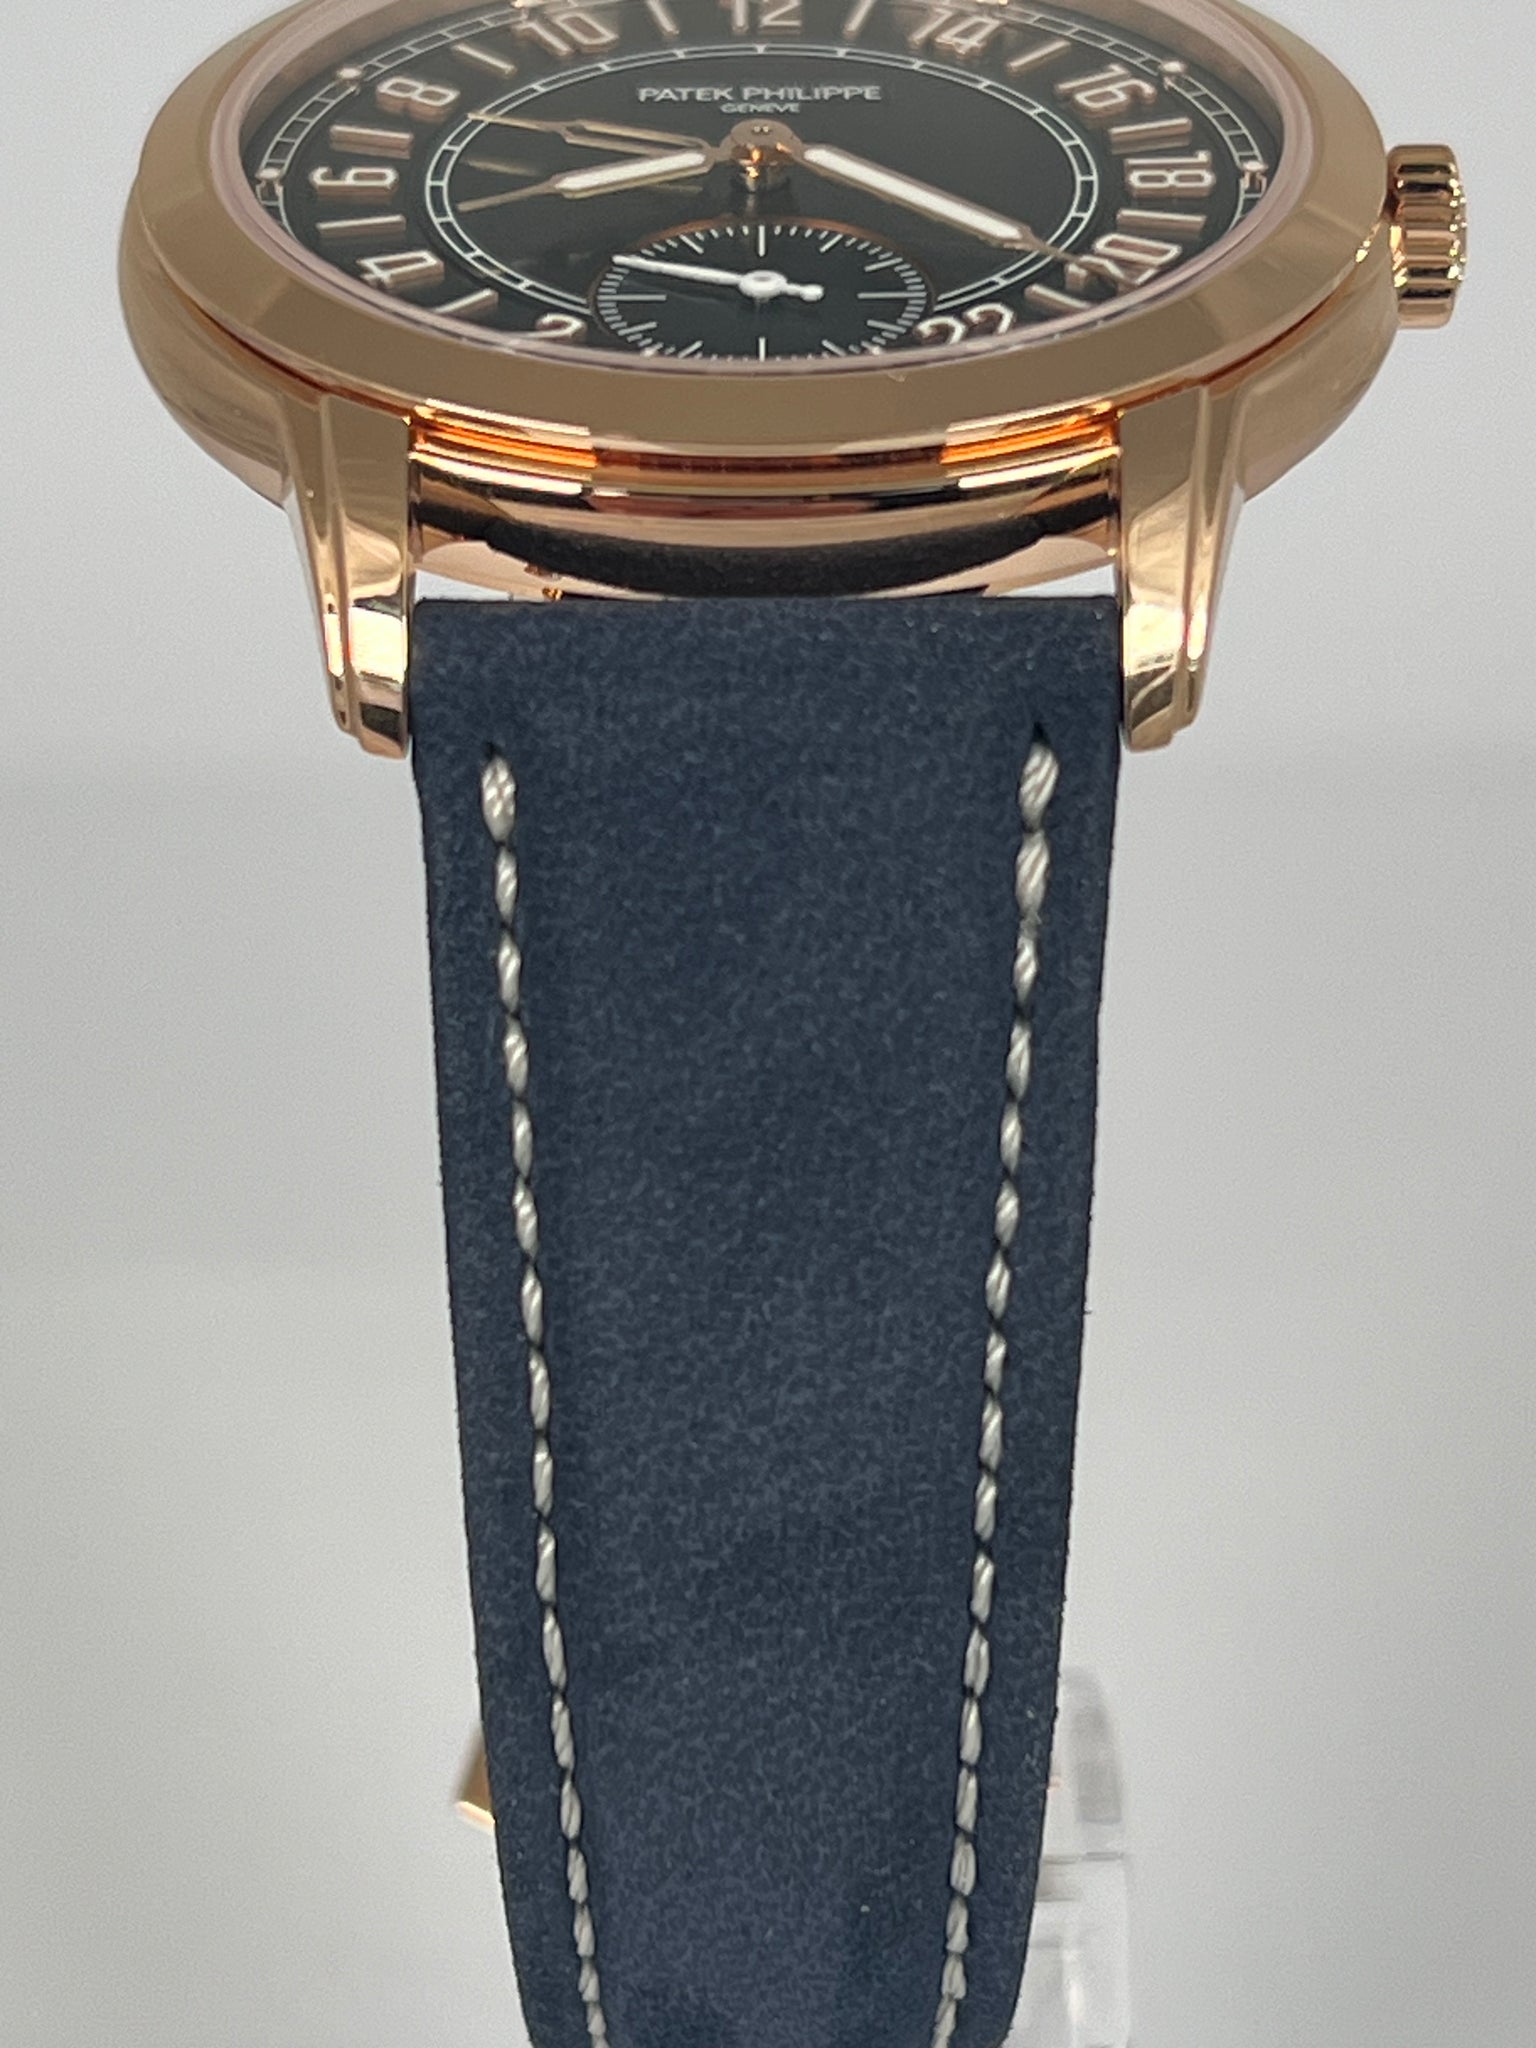 PATEK PHILIPPE 24 HOUR TRAVEL TIME BLUE DIAL ROSE GOLD 5224R